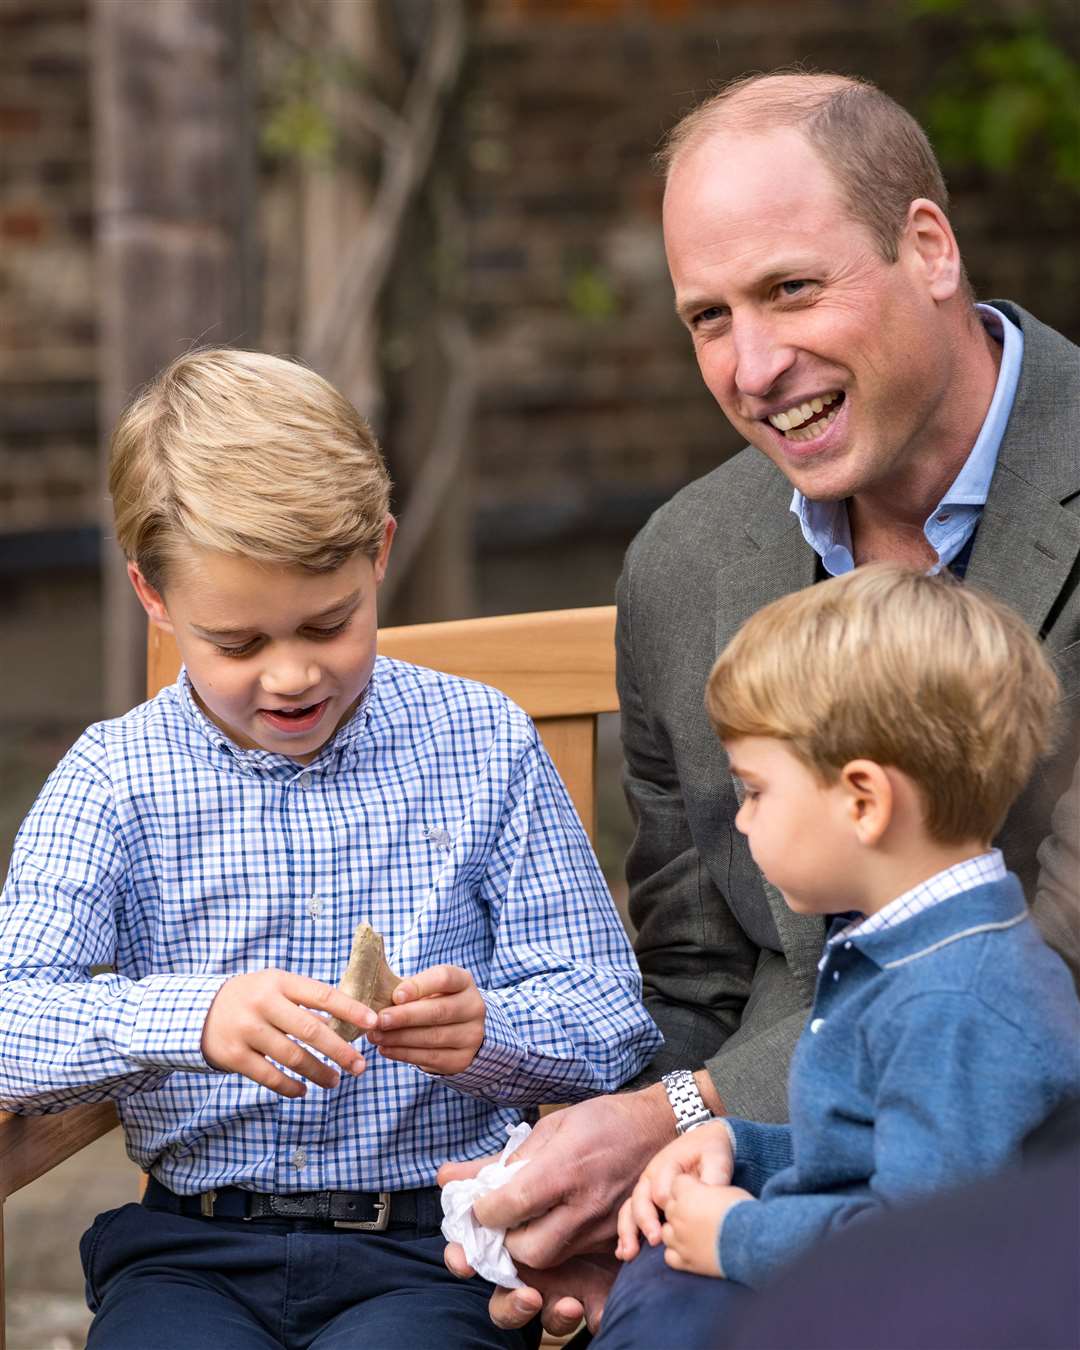 The Duke of Cambridge and Prince Louis watch as Prince George holds the tooth of a giant shark (Kensington Palace)